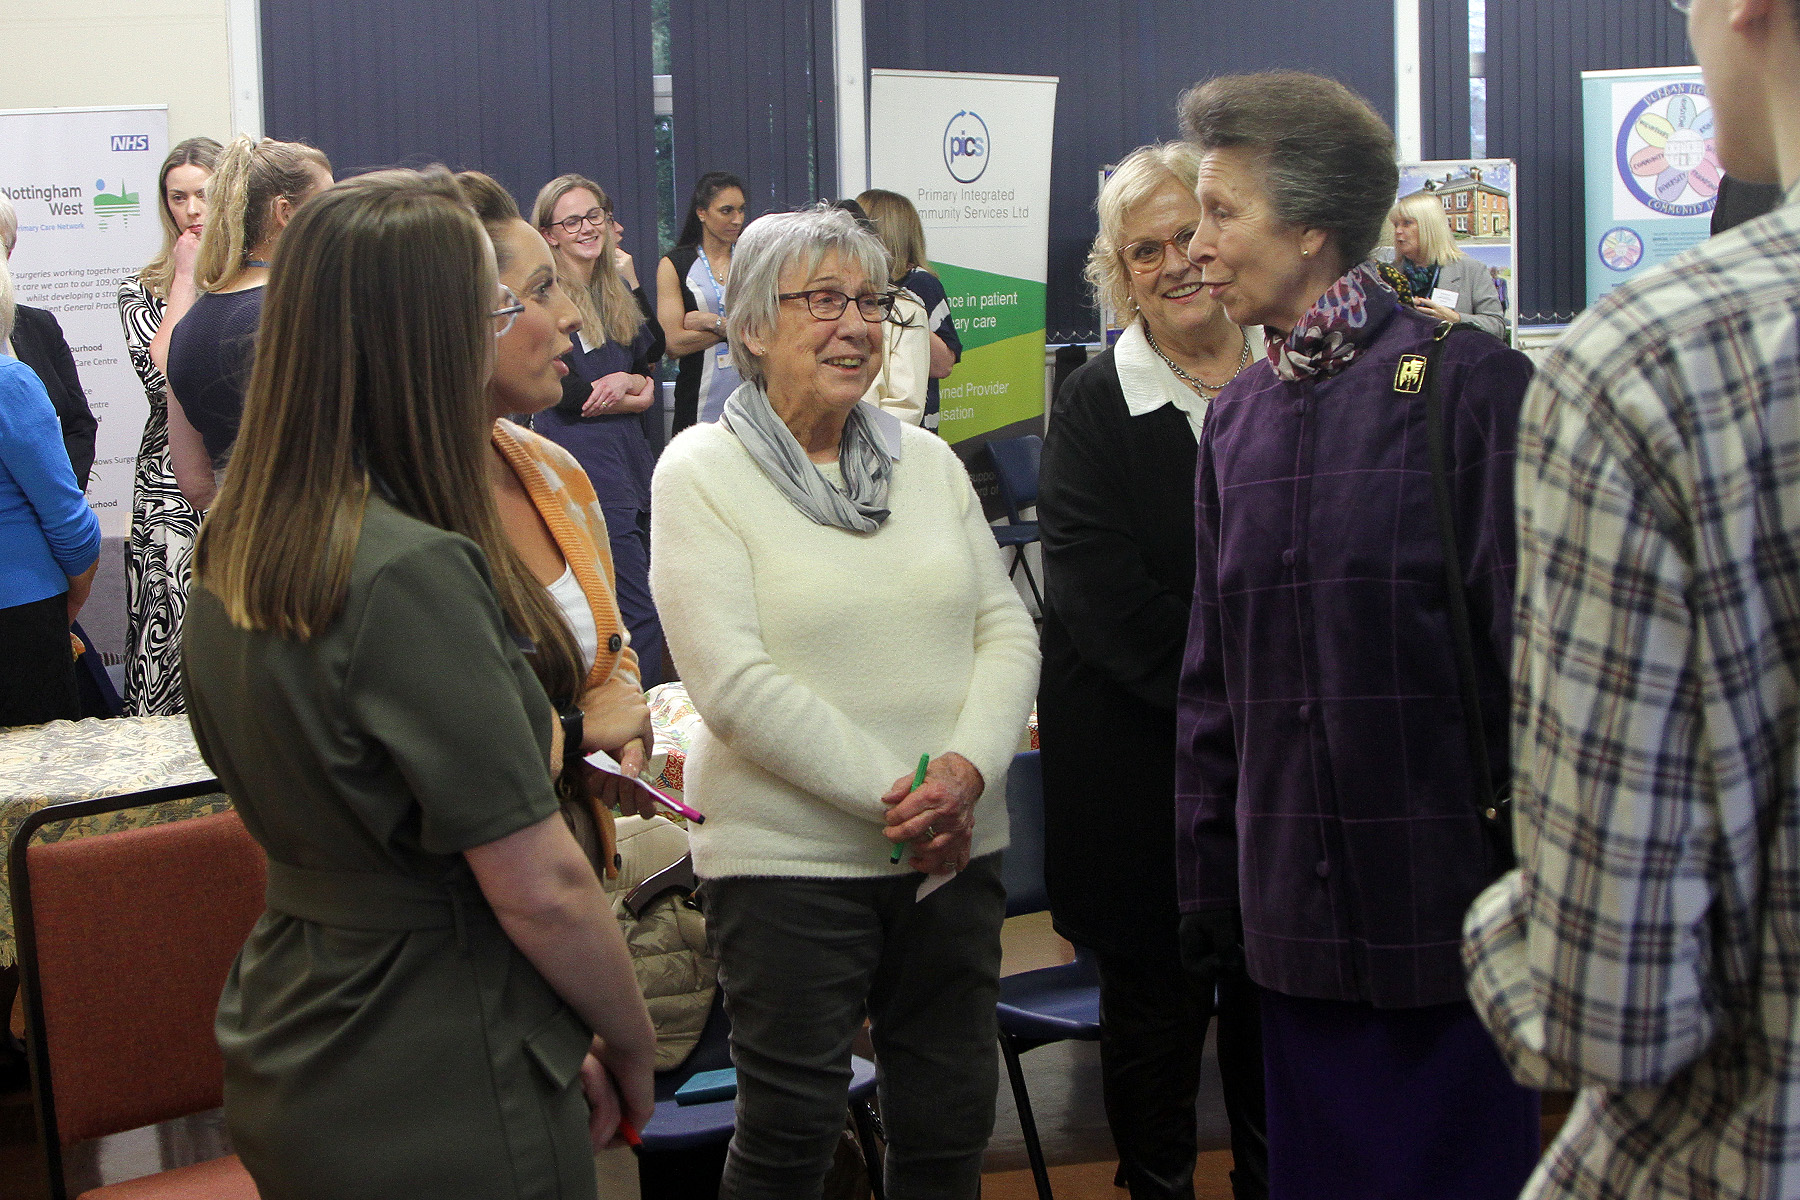 The Princess Royal launches new mental health therapy group in Broxtowe 